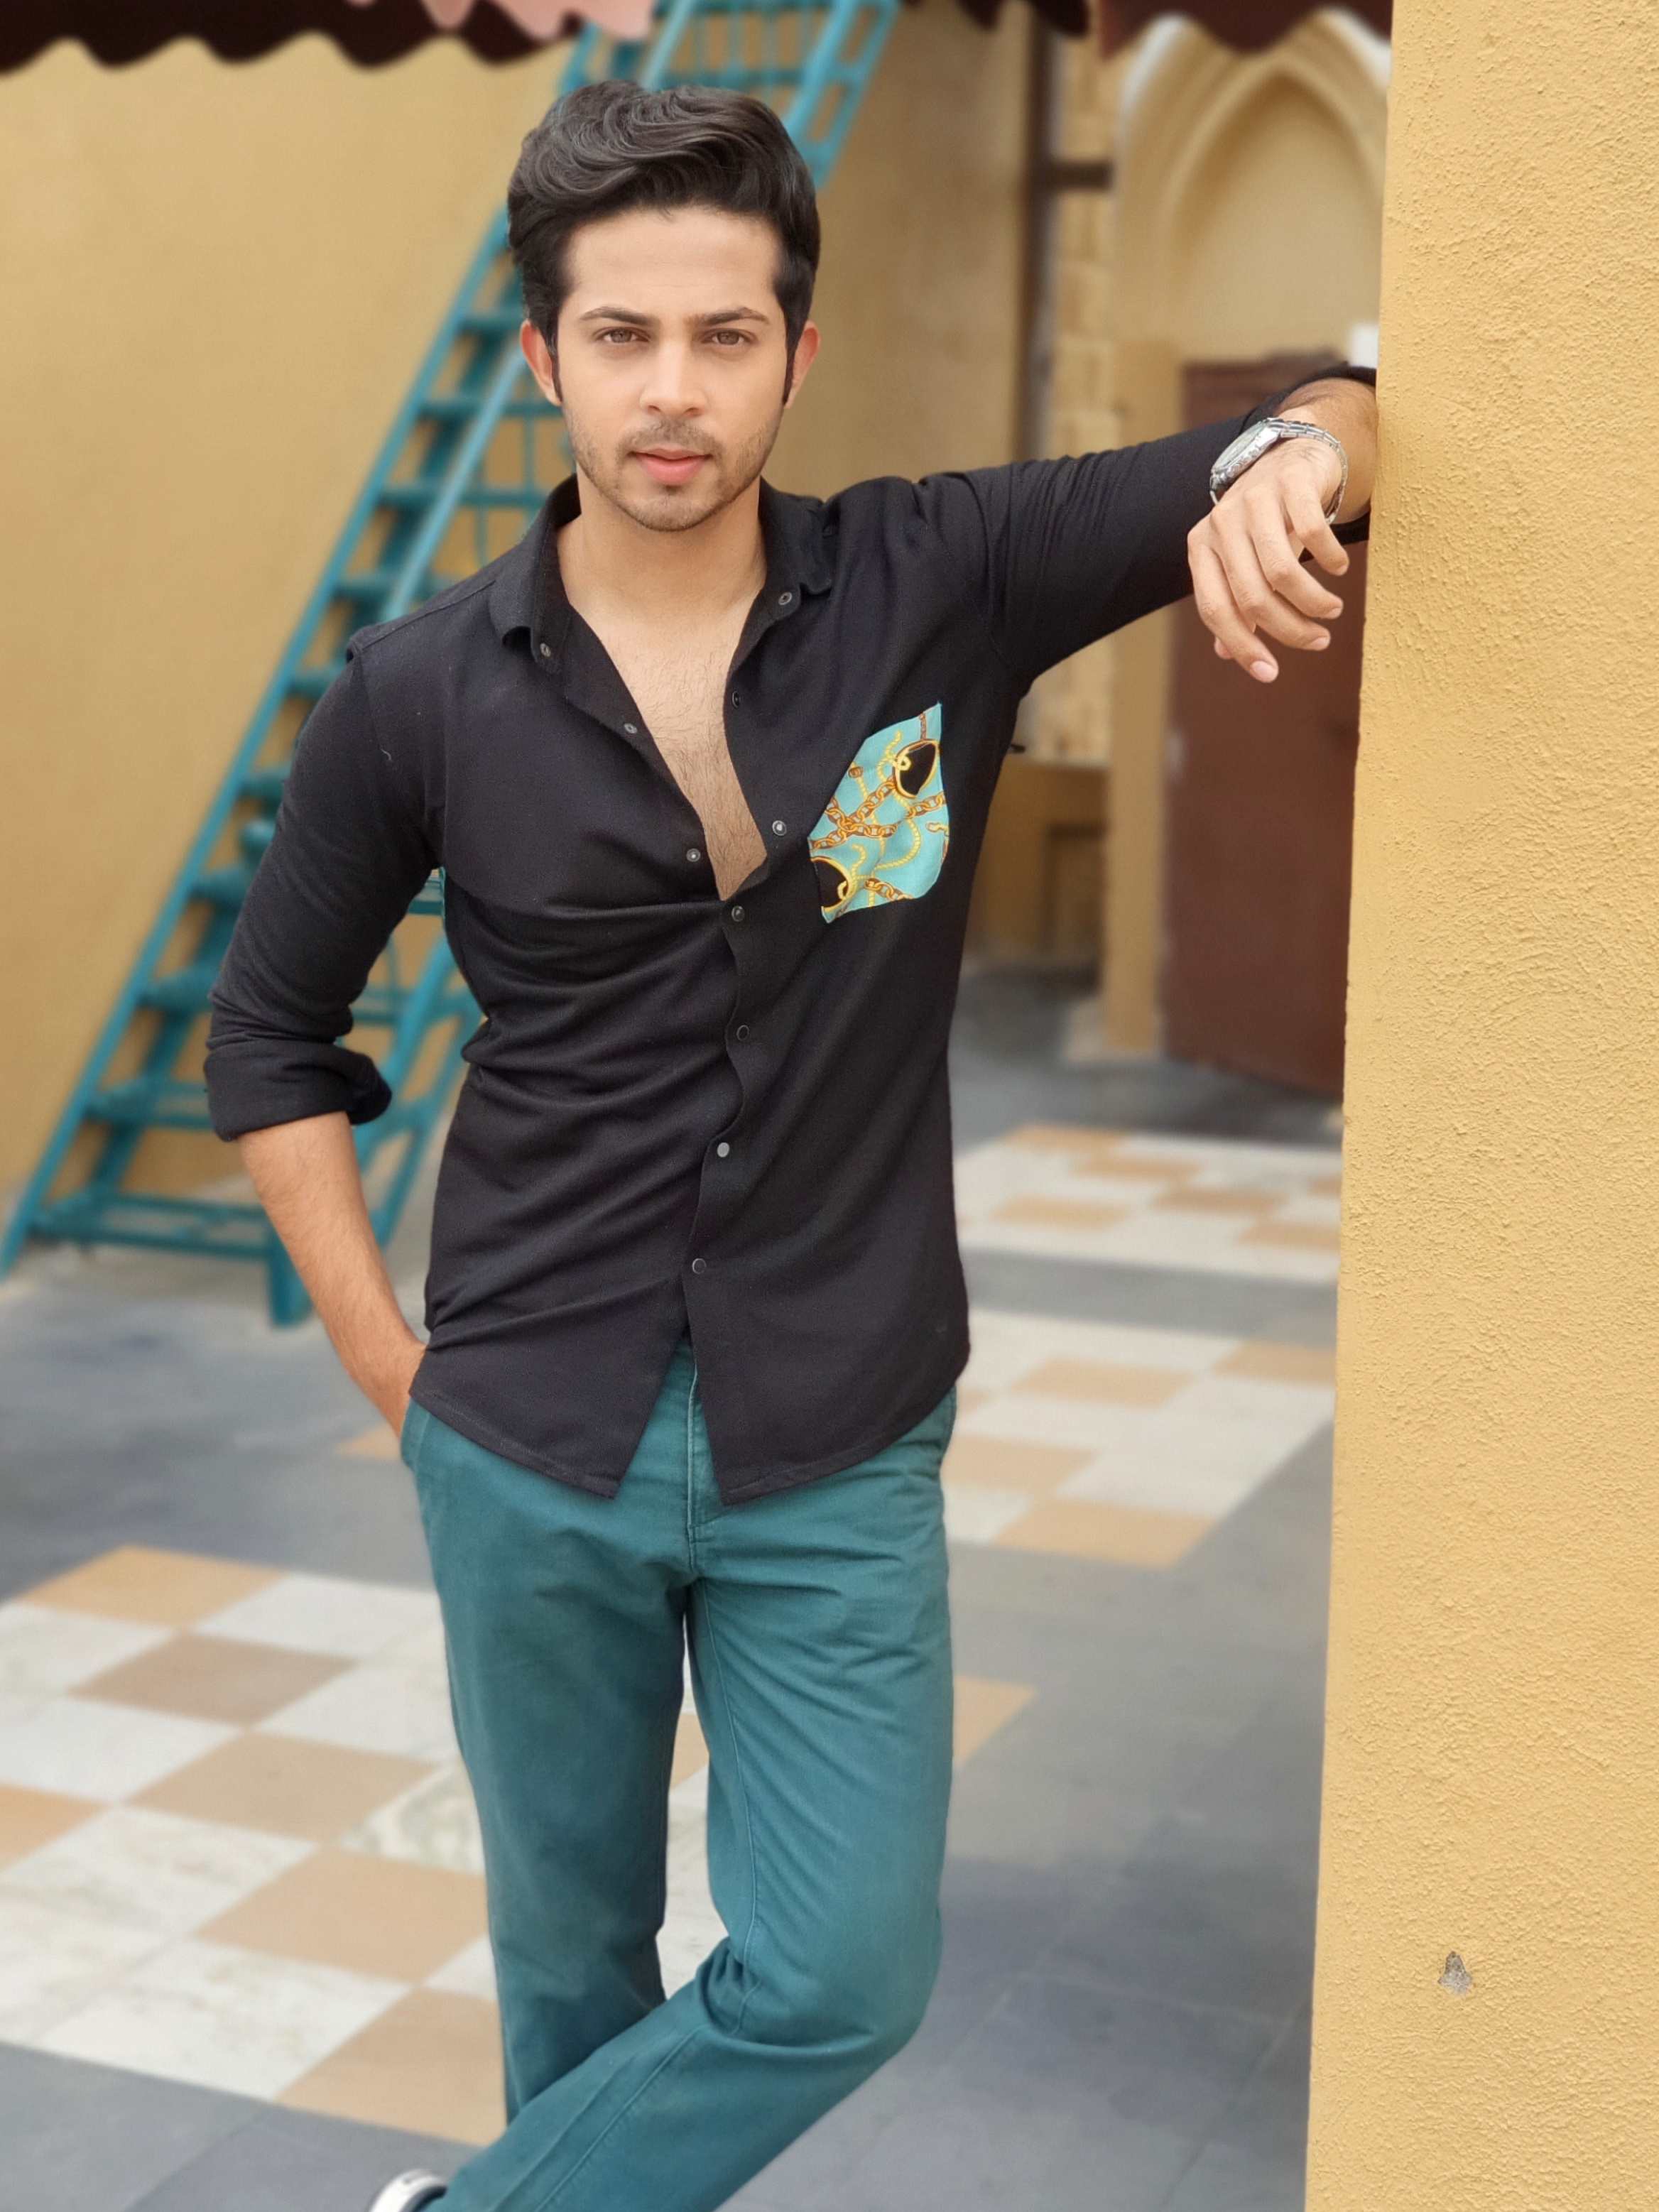 Balika Vadhu 2 fame Sagar Parekh will next be seen in the series Kaisi Yeh Yaariaan 4. Here’s a candid chat with the actor